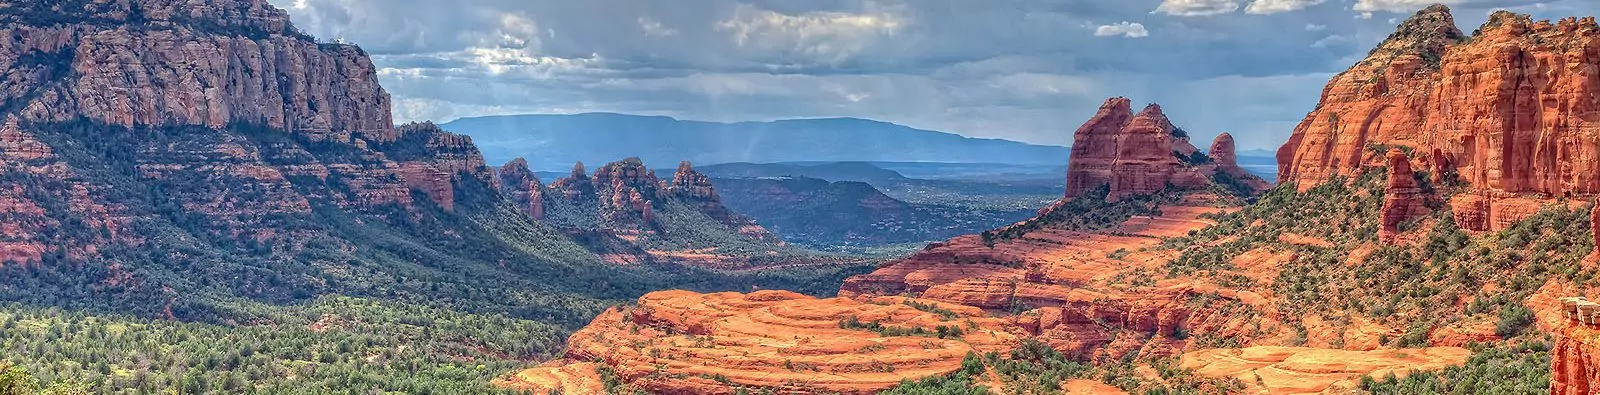 Storm clouds over Sedona cliffs and canyons